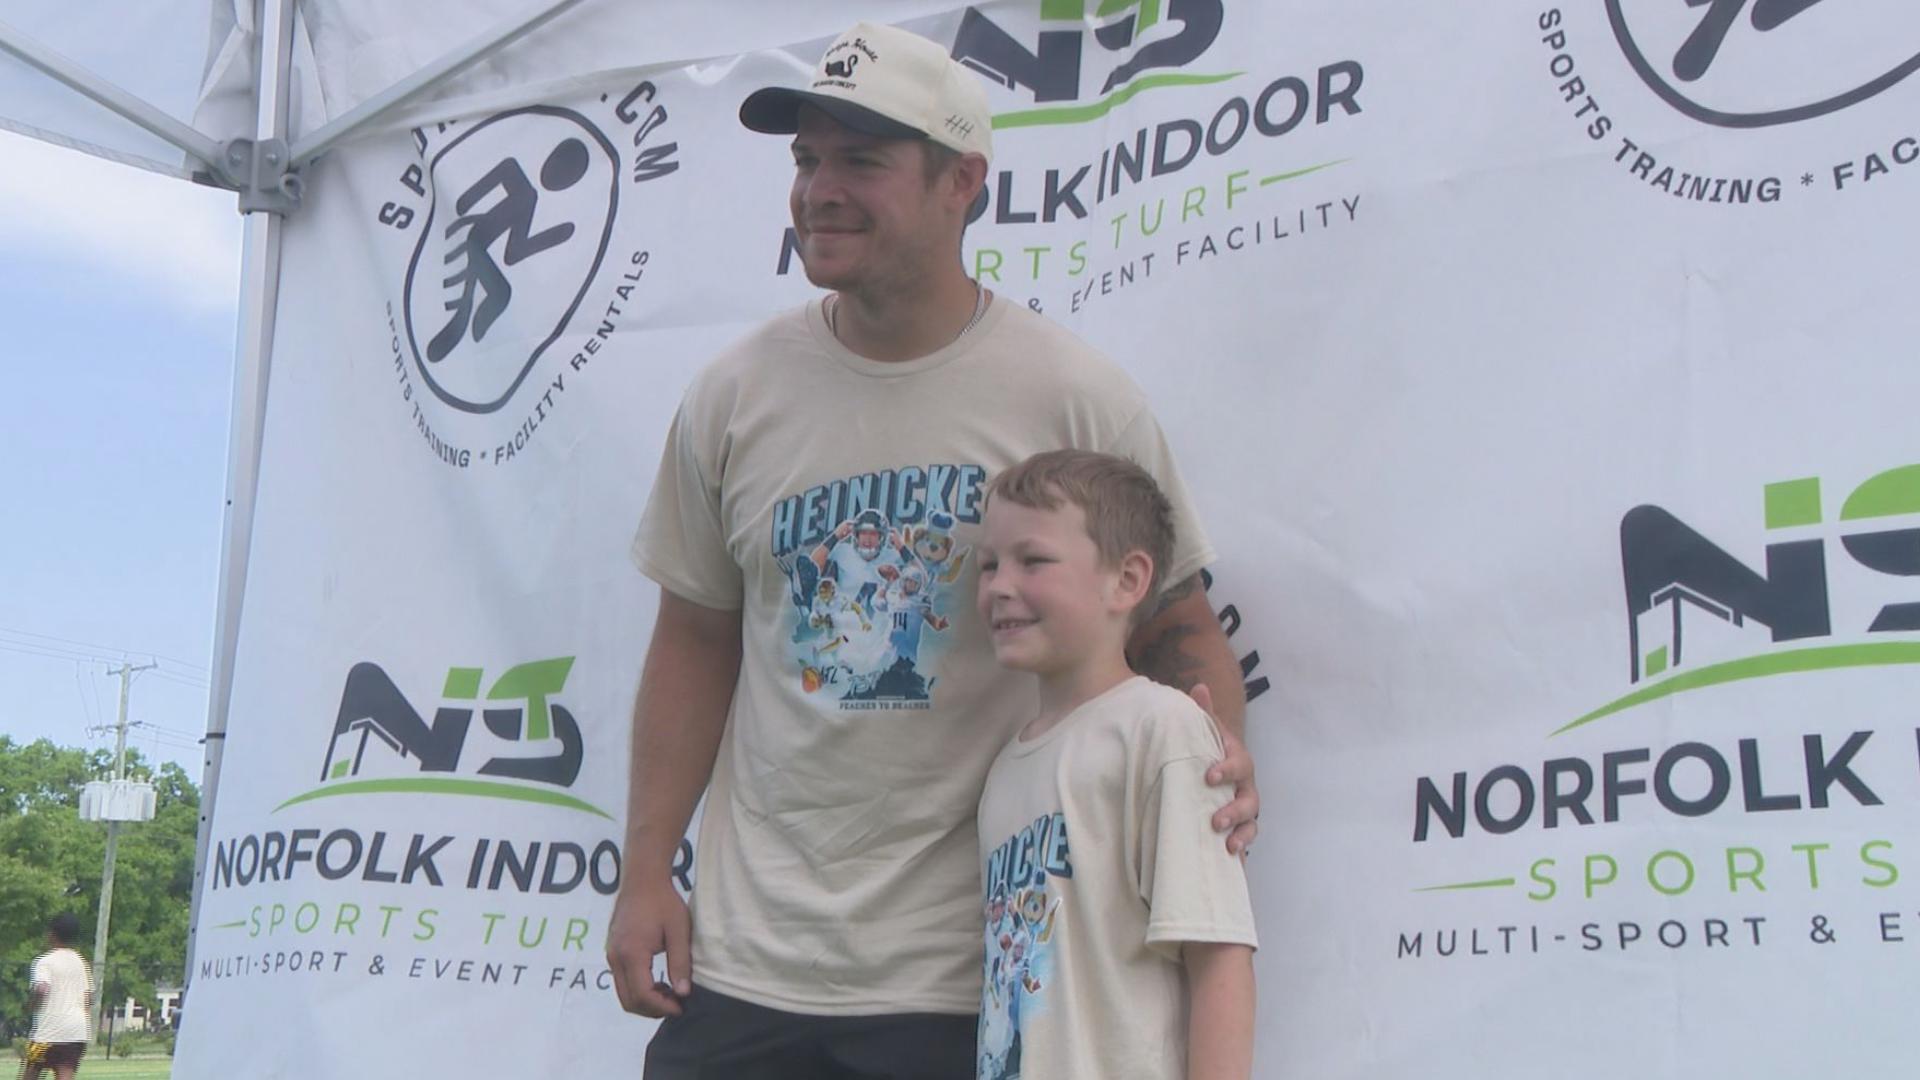 The 10th anniversary of the camp also marks Taylor Heinicke's 10th season playing in the NFL.